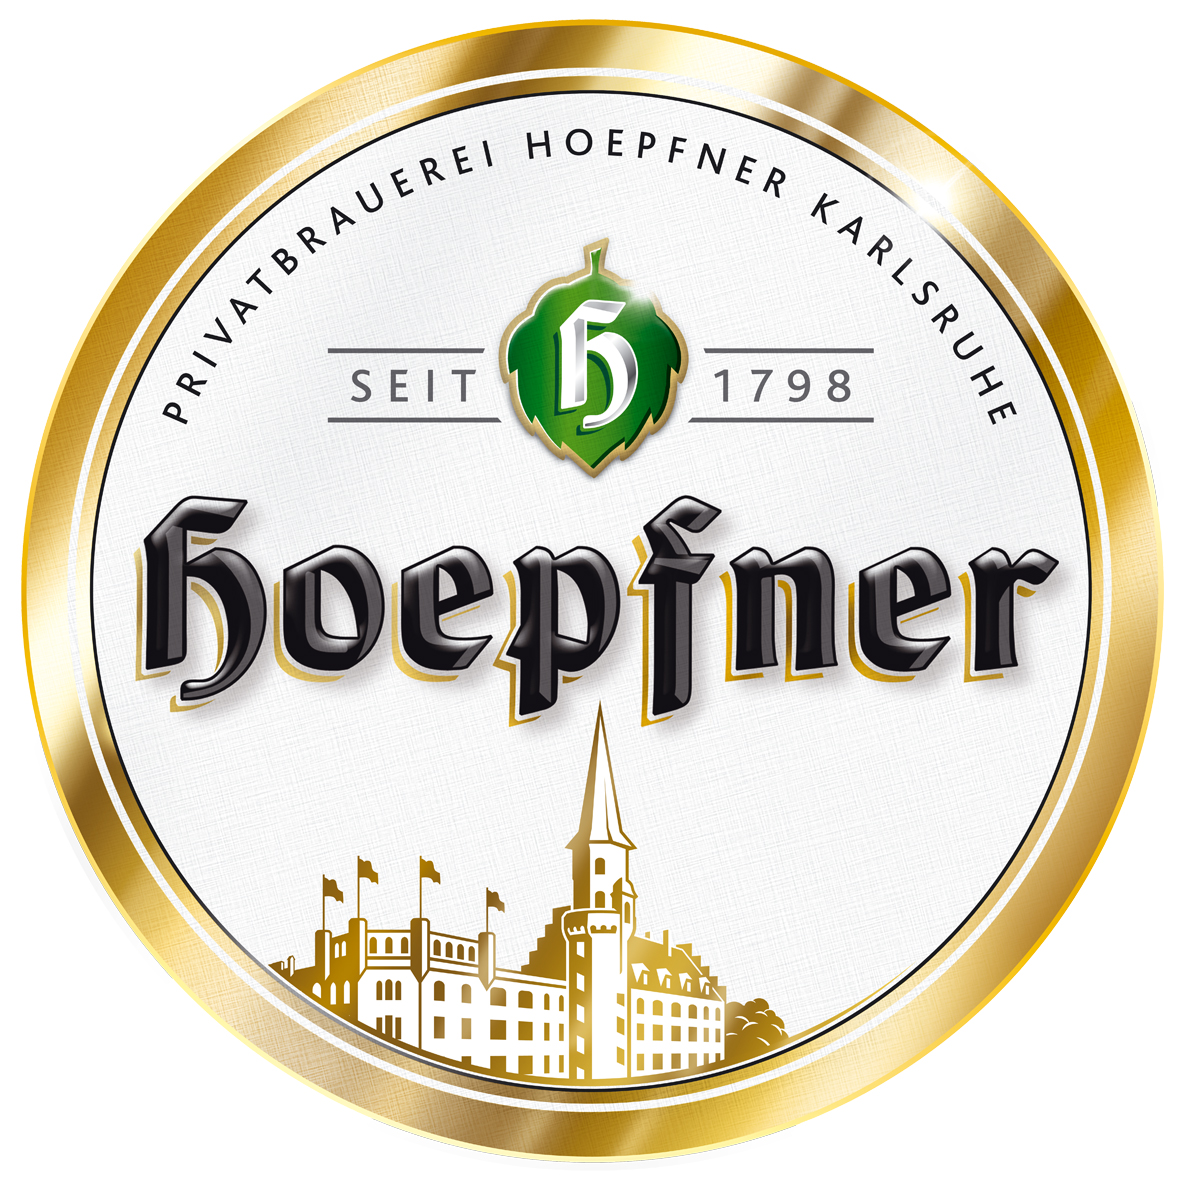 You are currently viewing Privatbrauerei Hoepfner